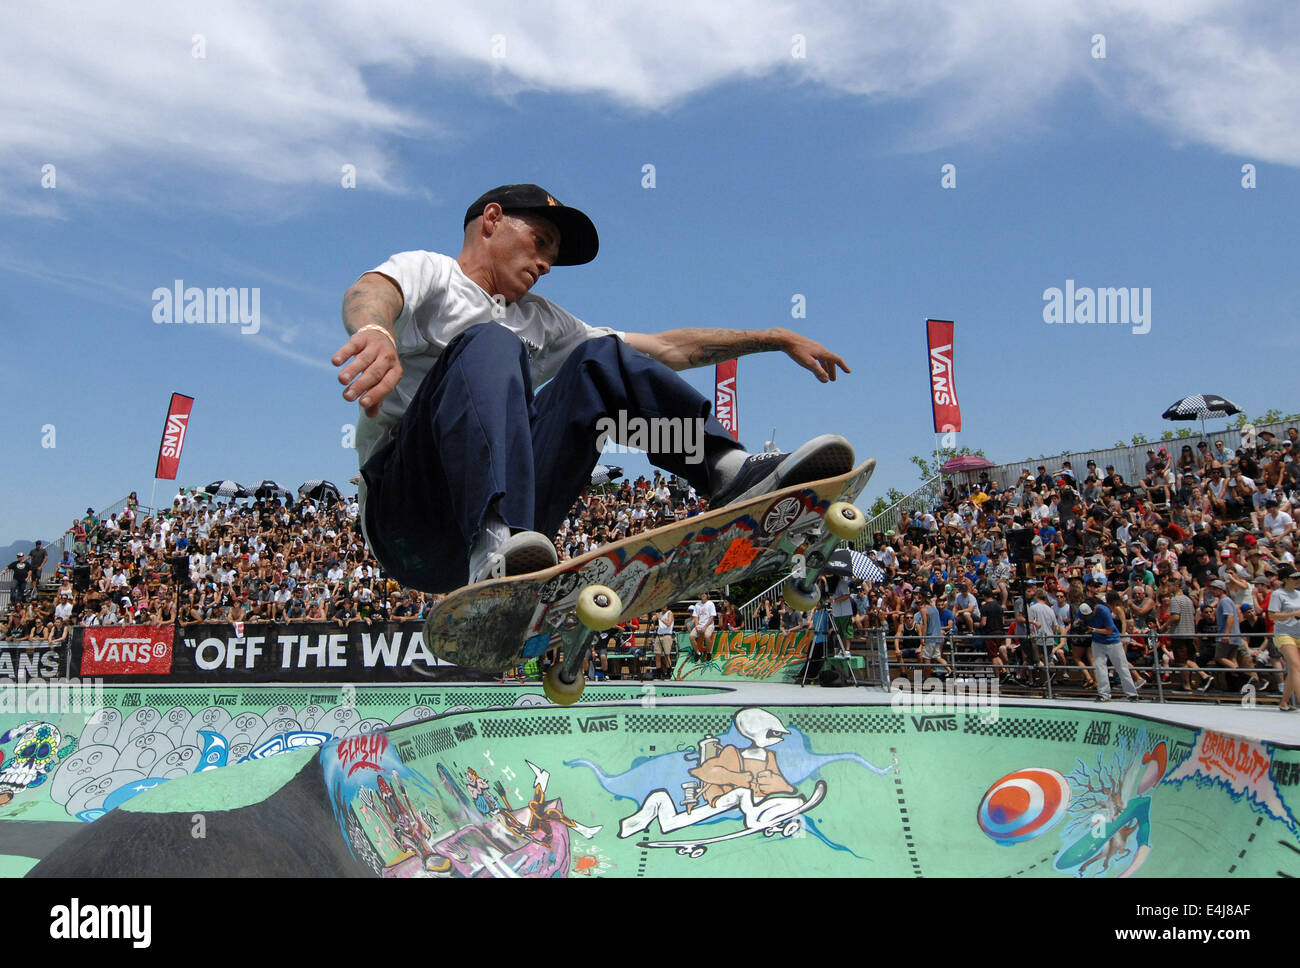 Vancouver, Canada. 12th July, 2014. Riley Stevens of the United States competes in the 2014 Van Doren Invitational skateboard competition in Vancouver, Canada, July 12, 2014. World's best skaters gathered here to compete for a trophy. It is the biggest event of it's kind in Vancouver. © Sergei Bachlakov/Xinhua/Alamy Live News Stock Photo